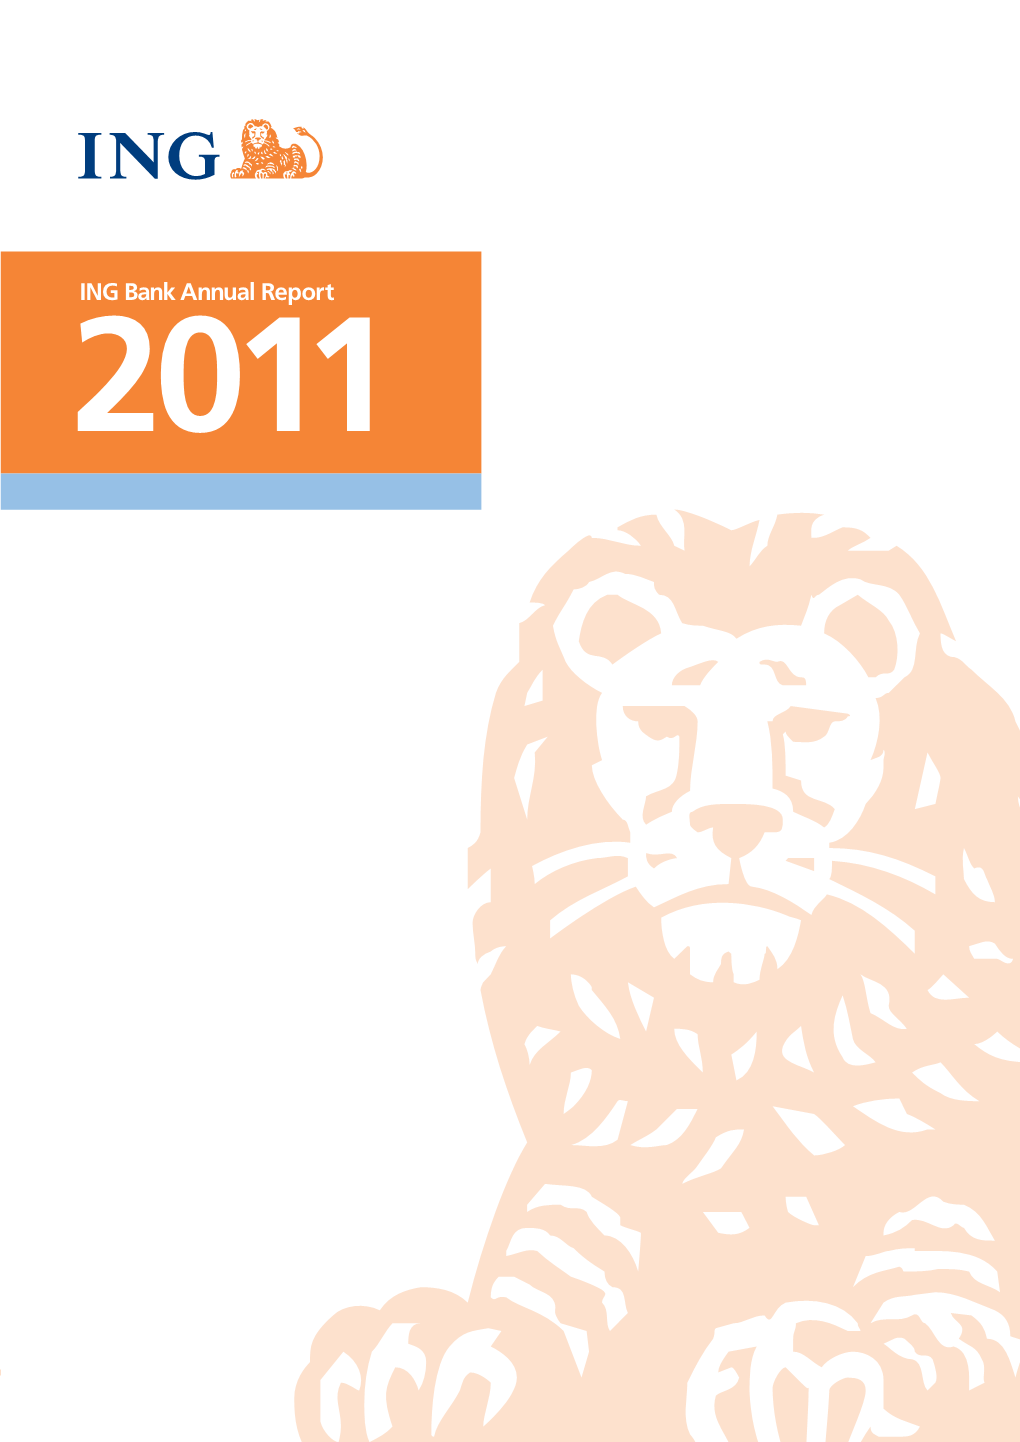 2011 Annual Report of ING Bank NV